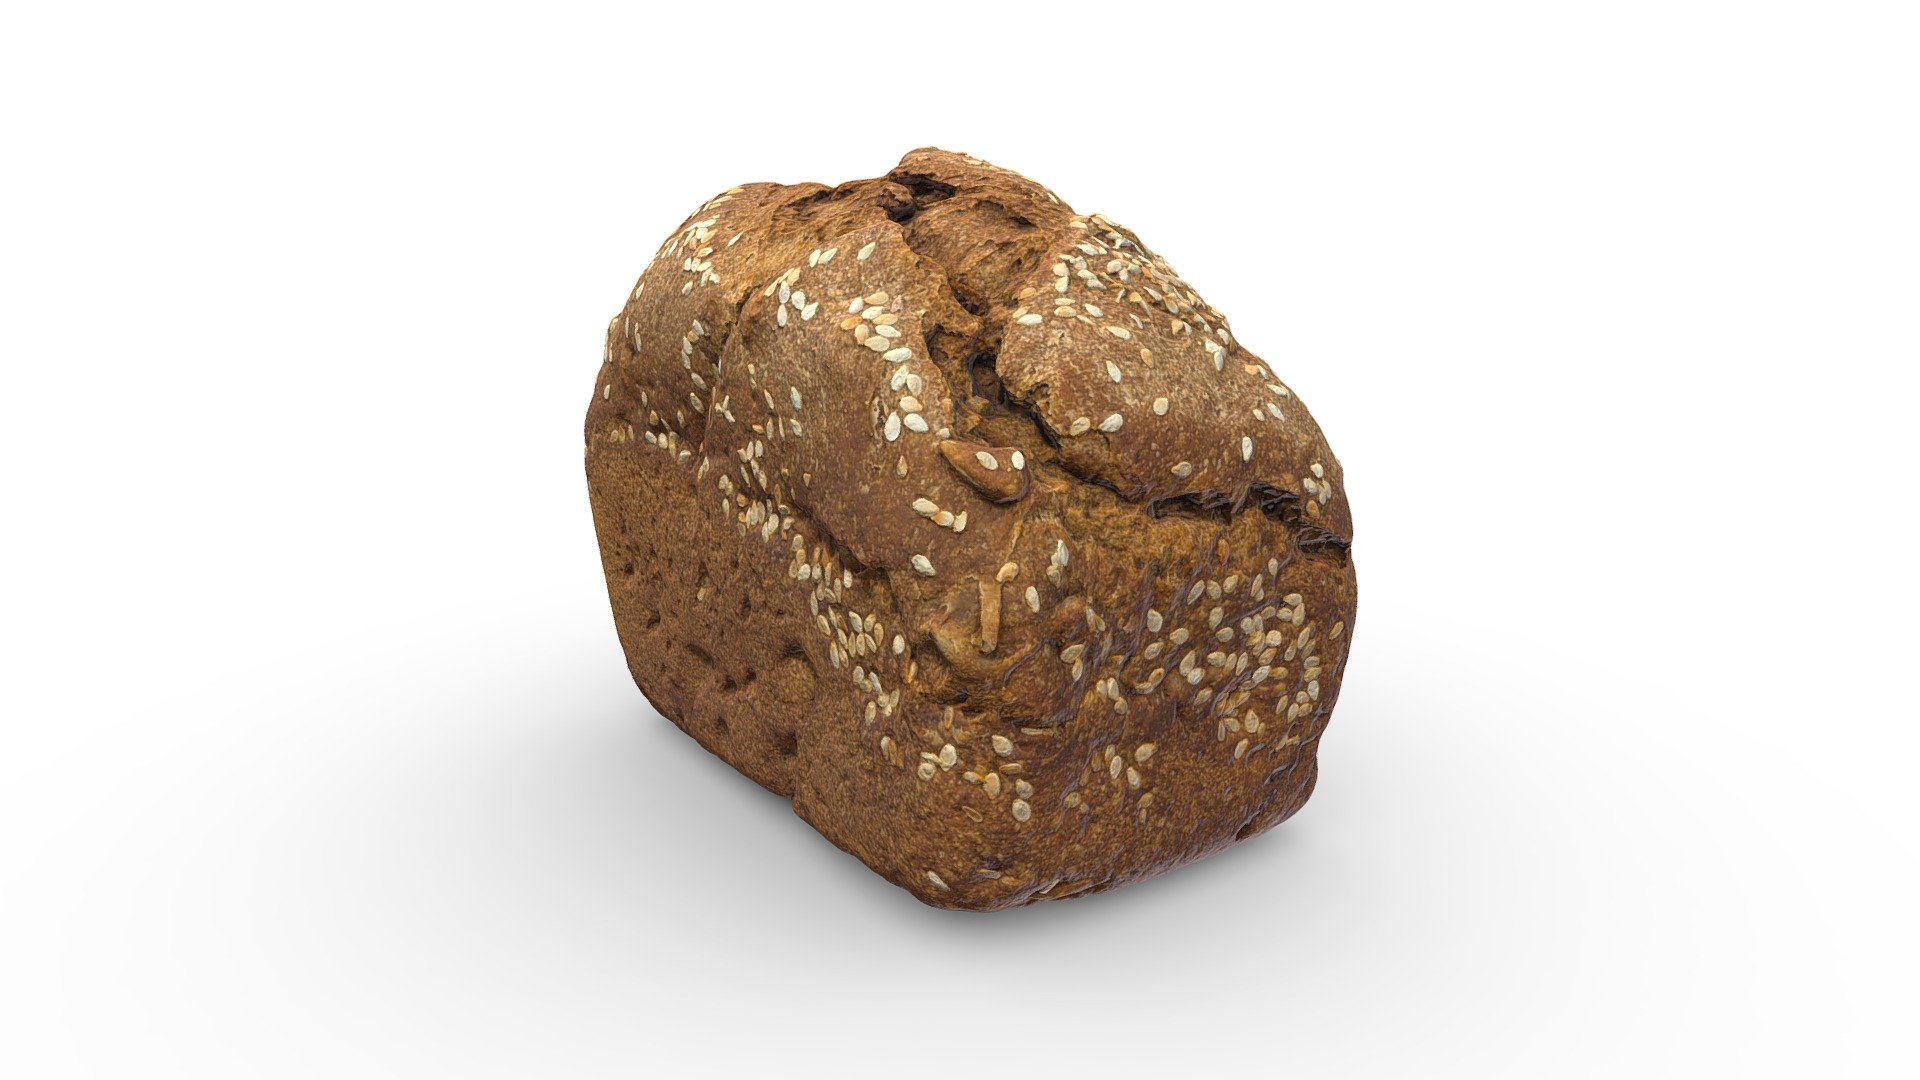 High-poly sesame bread photogrammetry scan. PBR texture maps 4096x4096 px. resolution for metallic or specular workflow. Scan from real food, high-poly 3D model, 4K resolution textures. Additional file contains source PNG texture maps.

Additional texture maps: AmbientOcclusion, BaseColor, Diffuse, Glossiness, Height, Metallic, MetallicSmoothness, Normal, Roughness, Specular, SpecularLevel, SpecularSmoothness 3d model